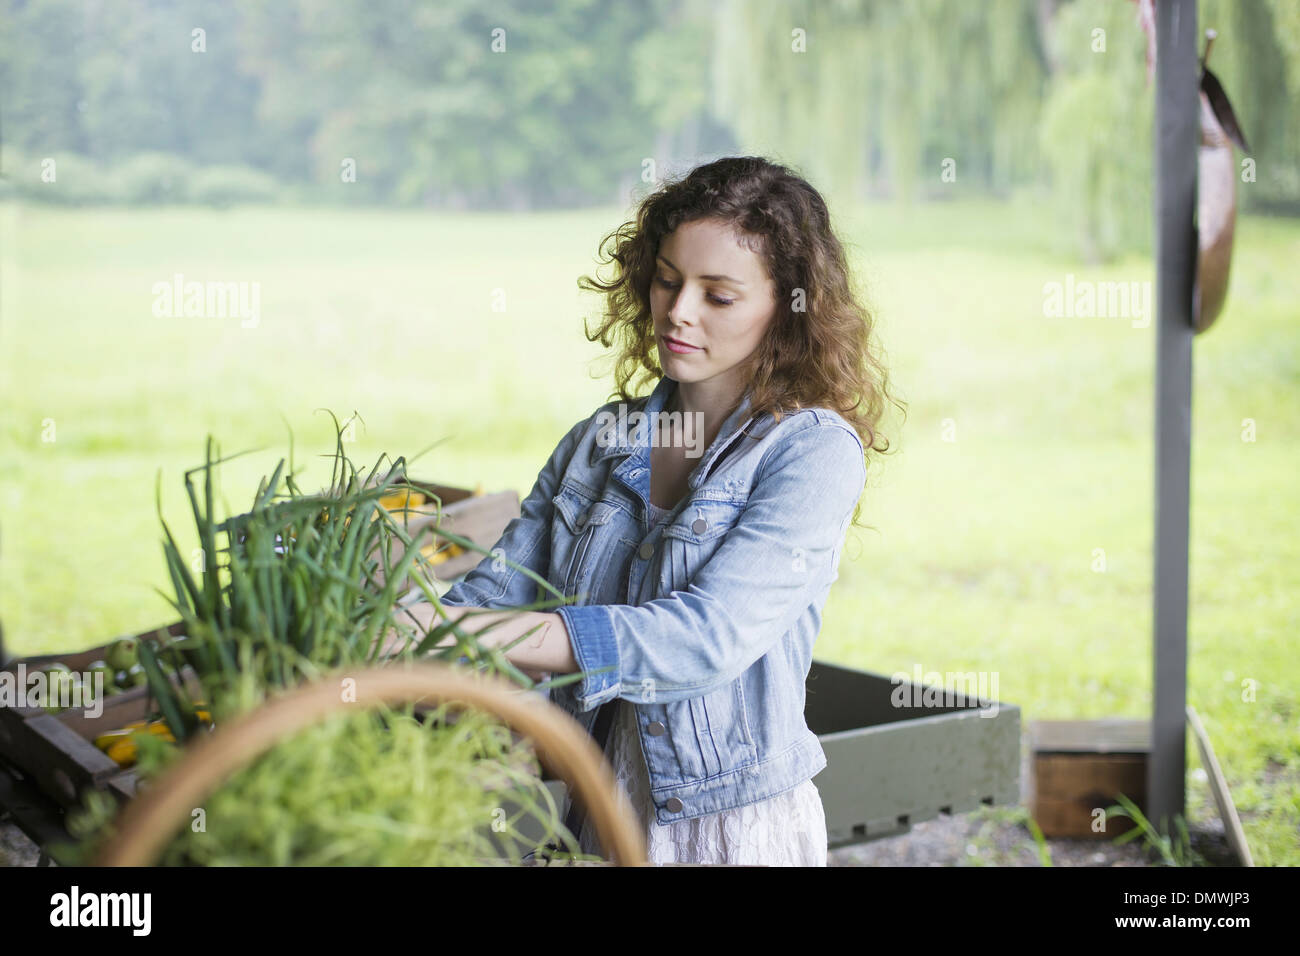 An organic fruit and vegetable farm. A young woman sorting vegetables. Stock Photo